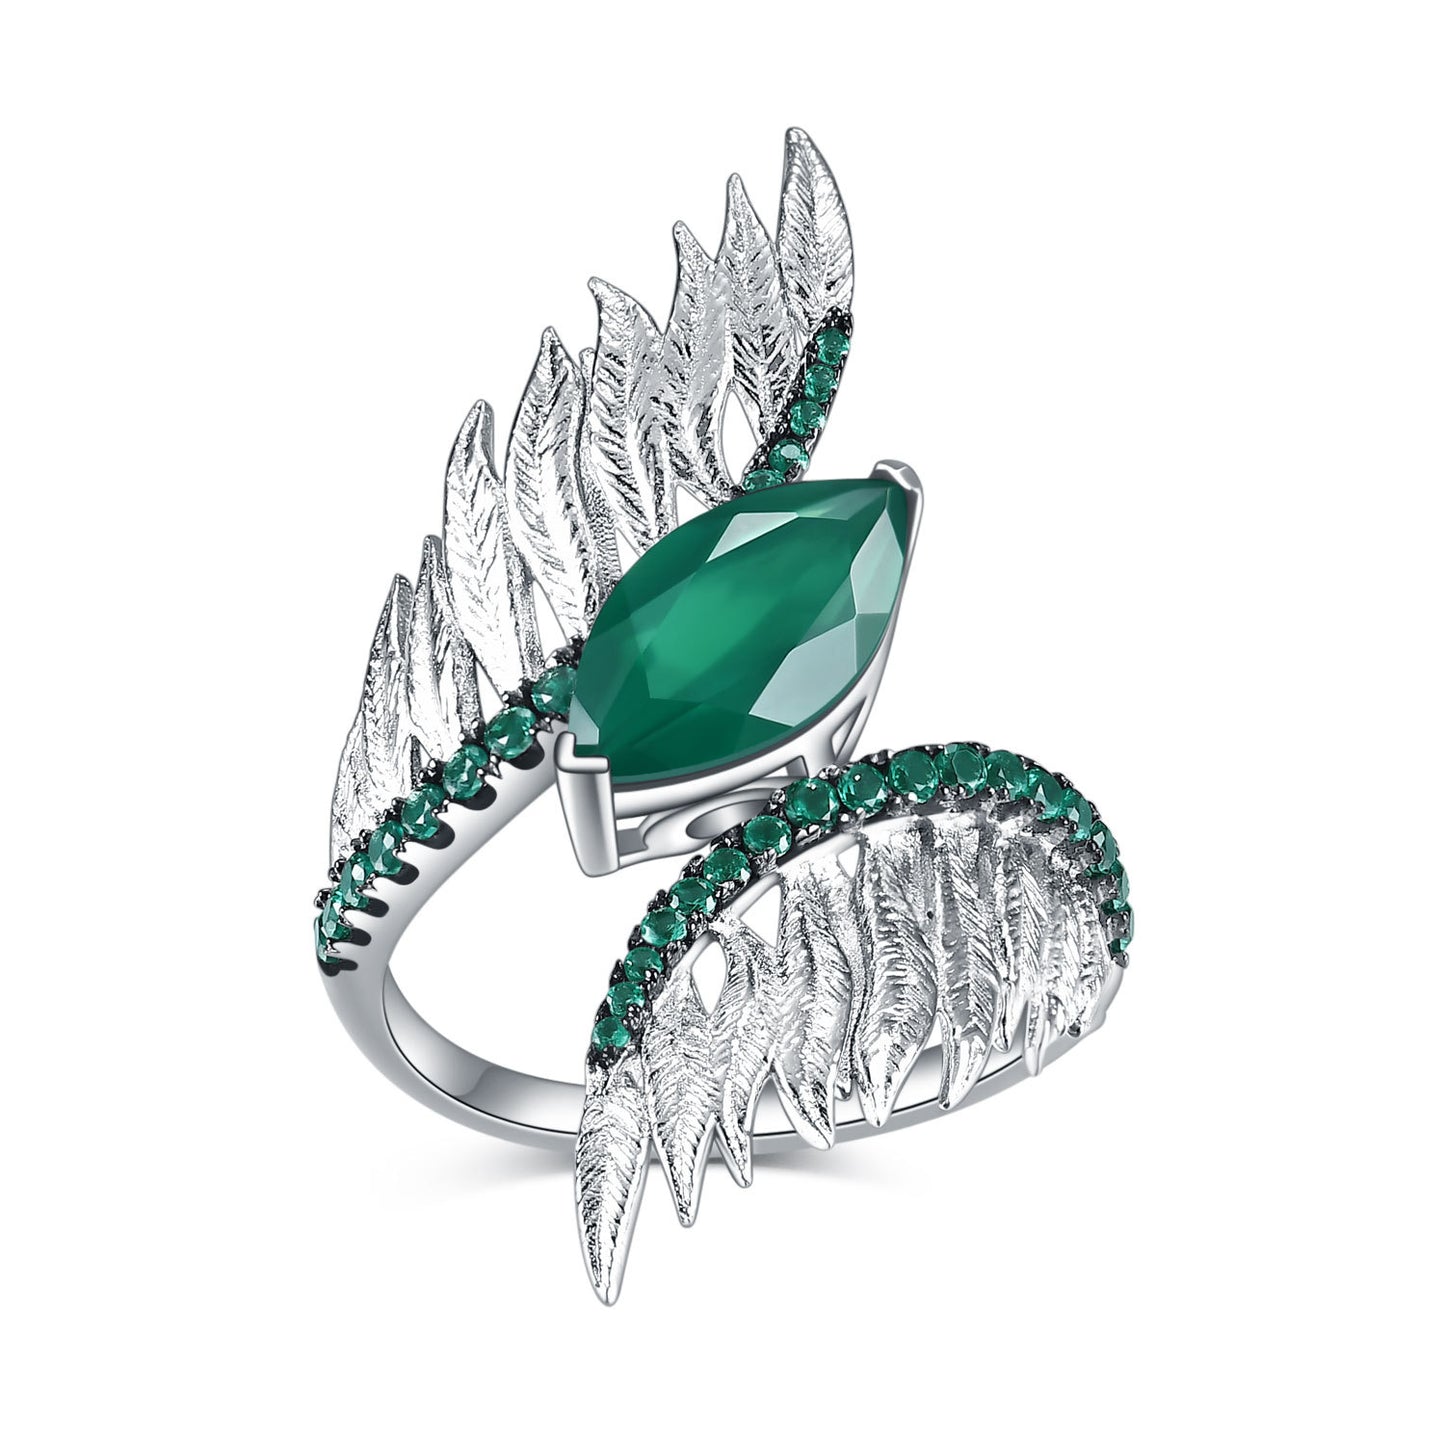 Retro Angel Wing Marquise Shape Natural Gemstones Silver Ring